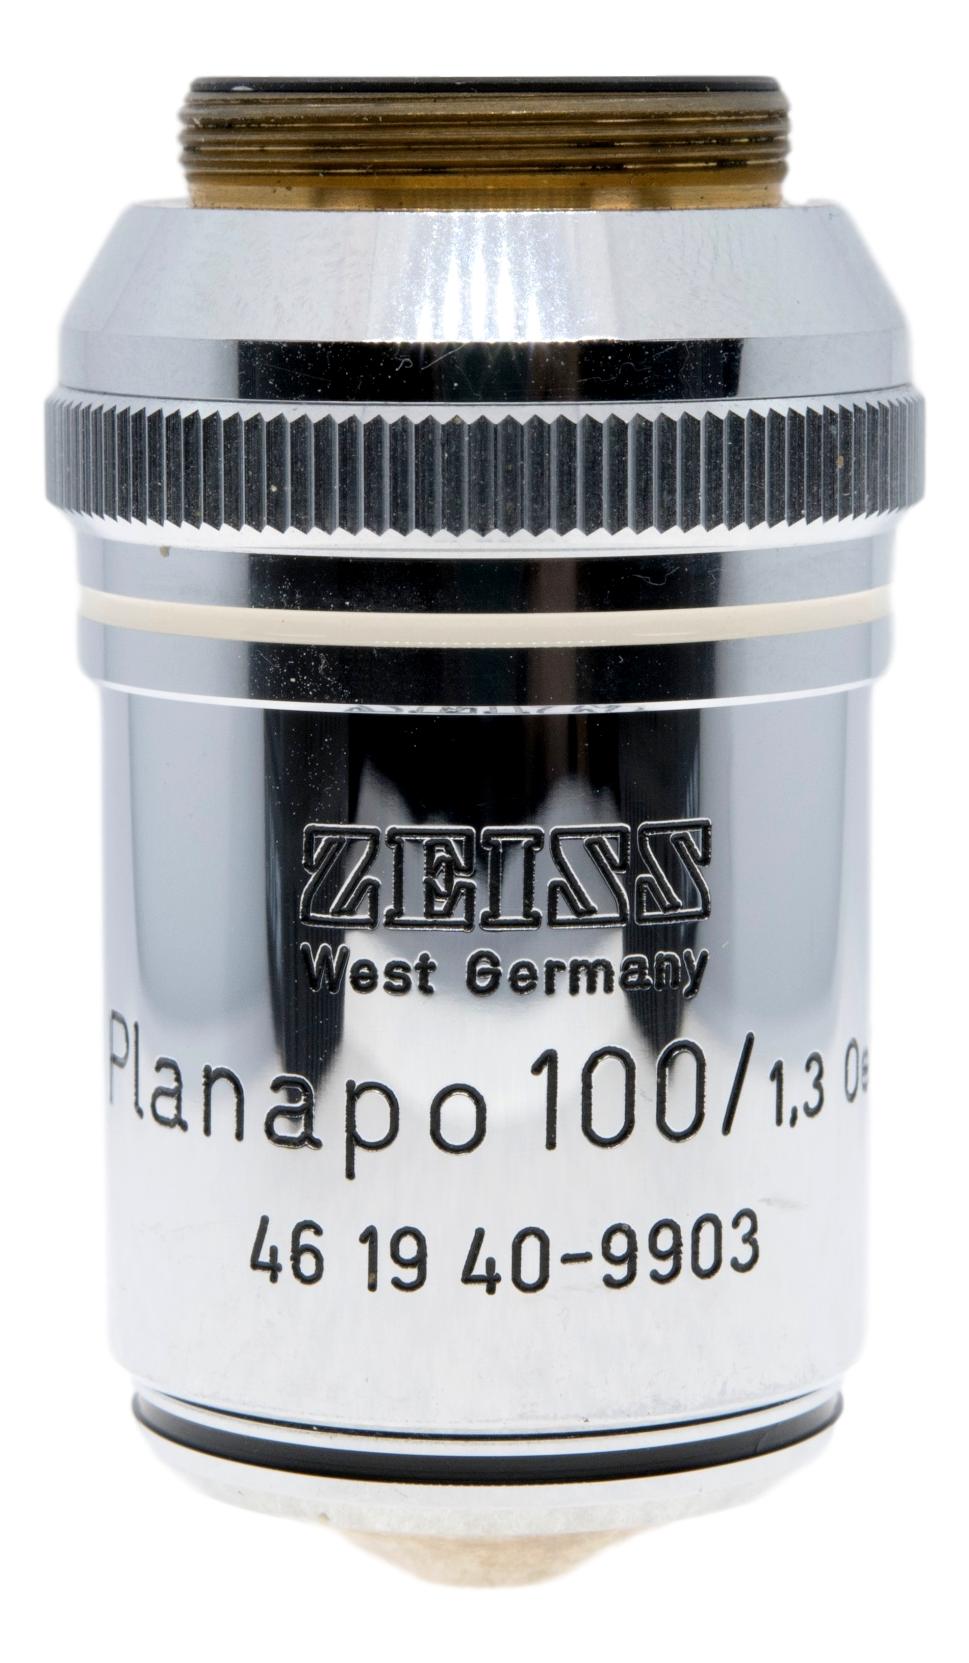 Zeiss 100x Planapo Oil Objective